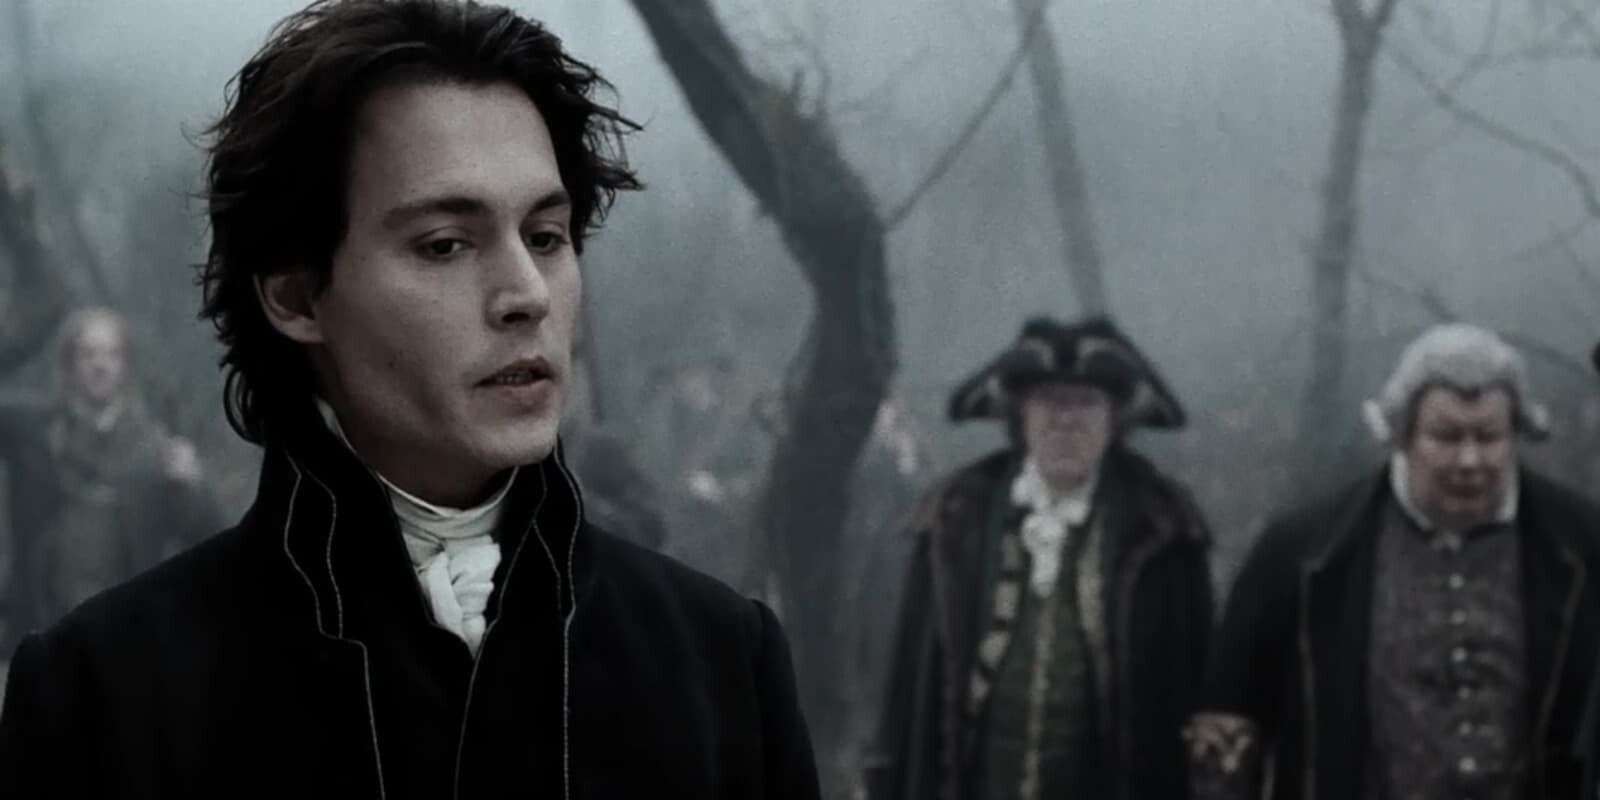 Sleepy Hollow features great period clothing